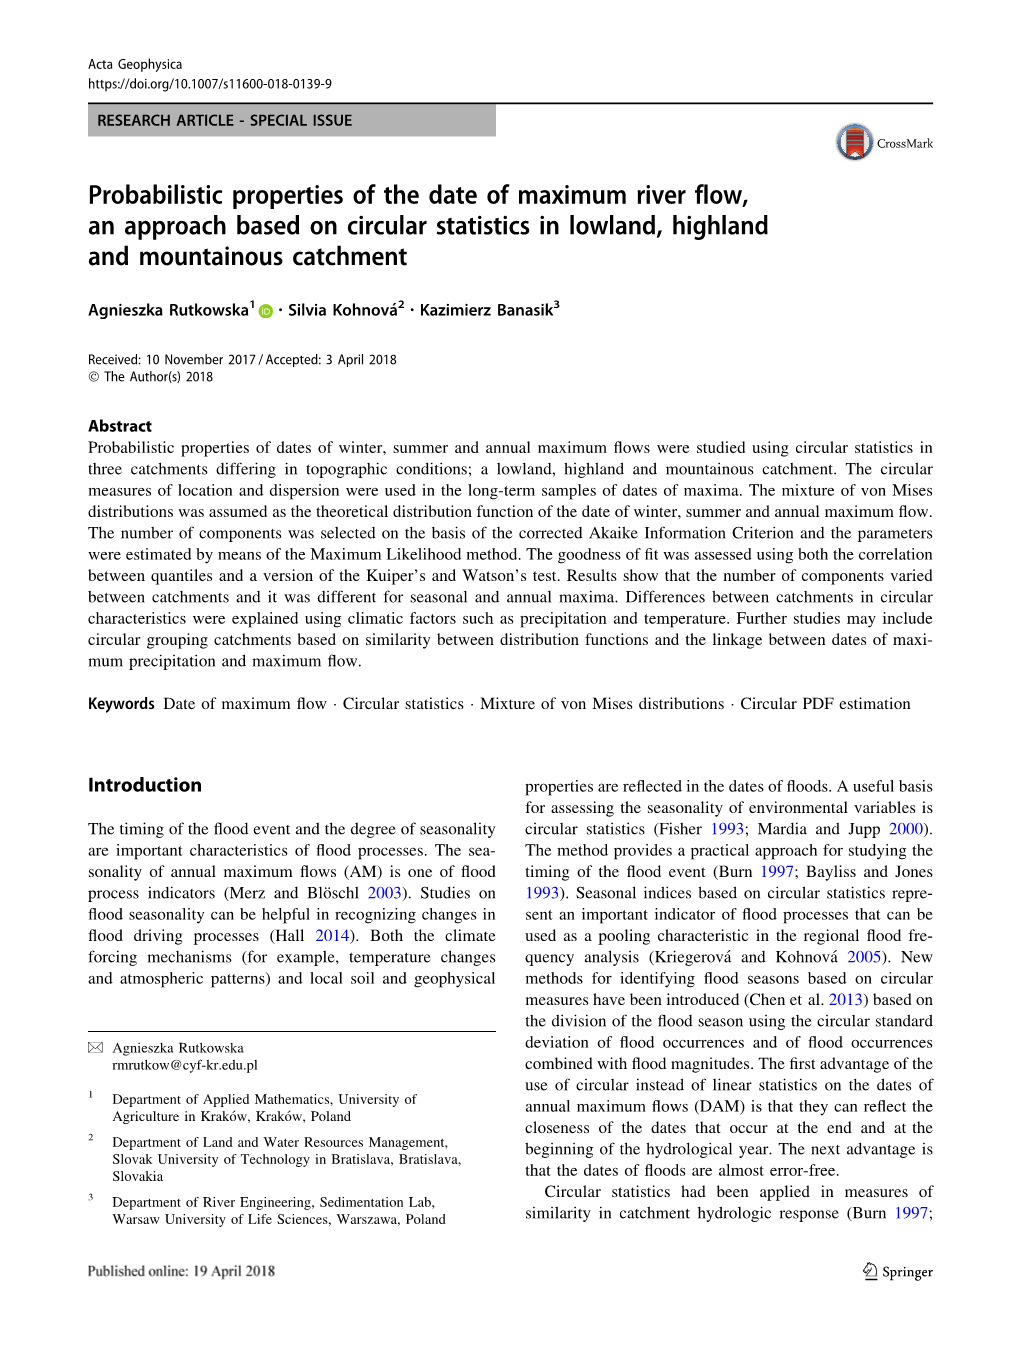 Probabilistic Properties of the Date of Maximum River Flow, an Approach Based on Circular Statistics in Lowland, Highland and Mountainous Catchment